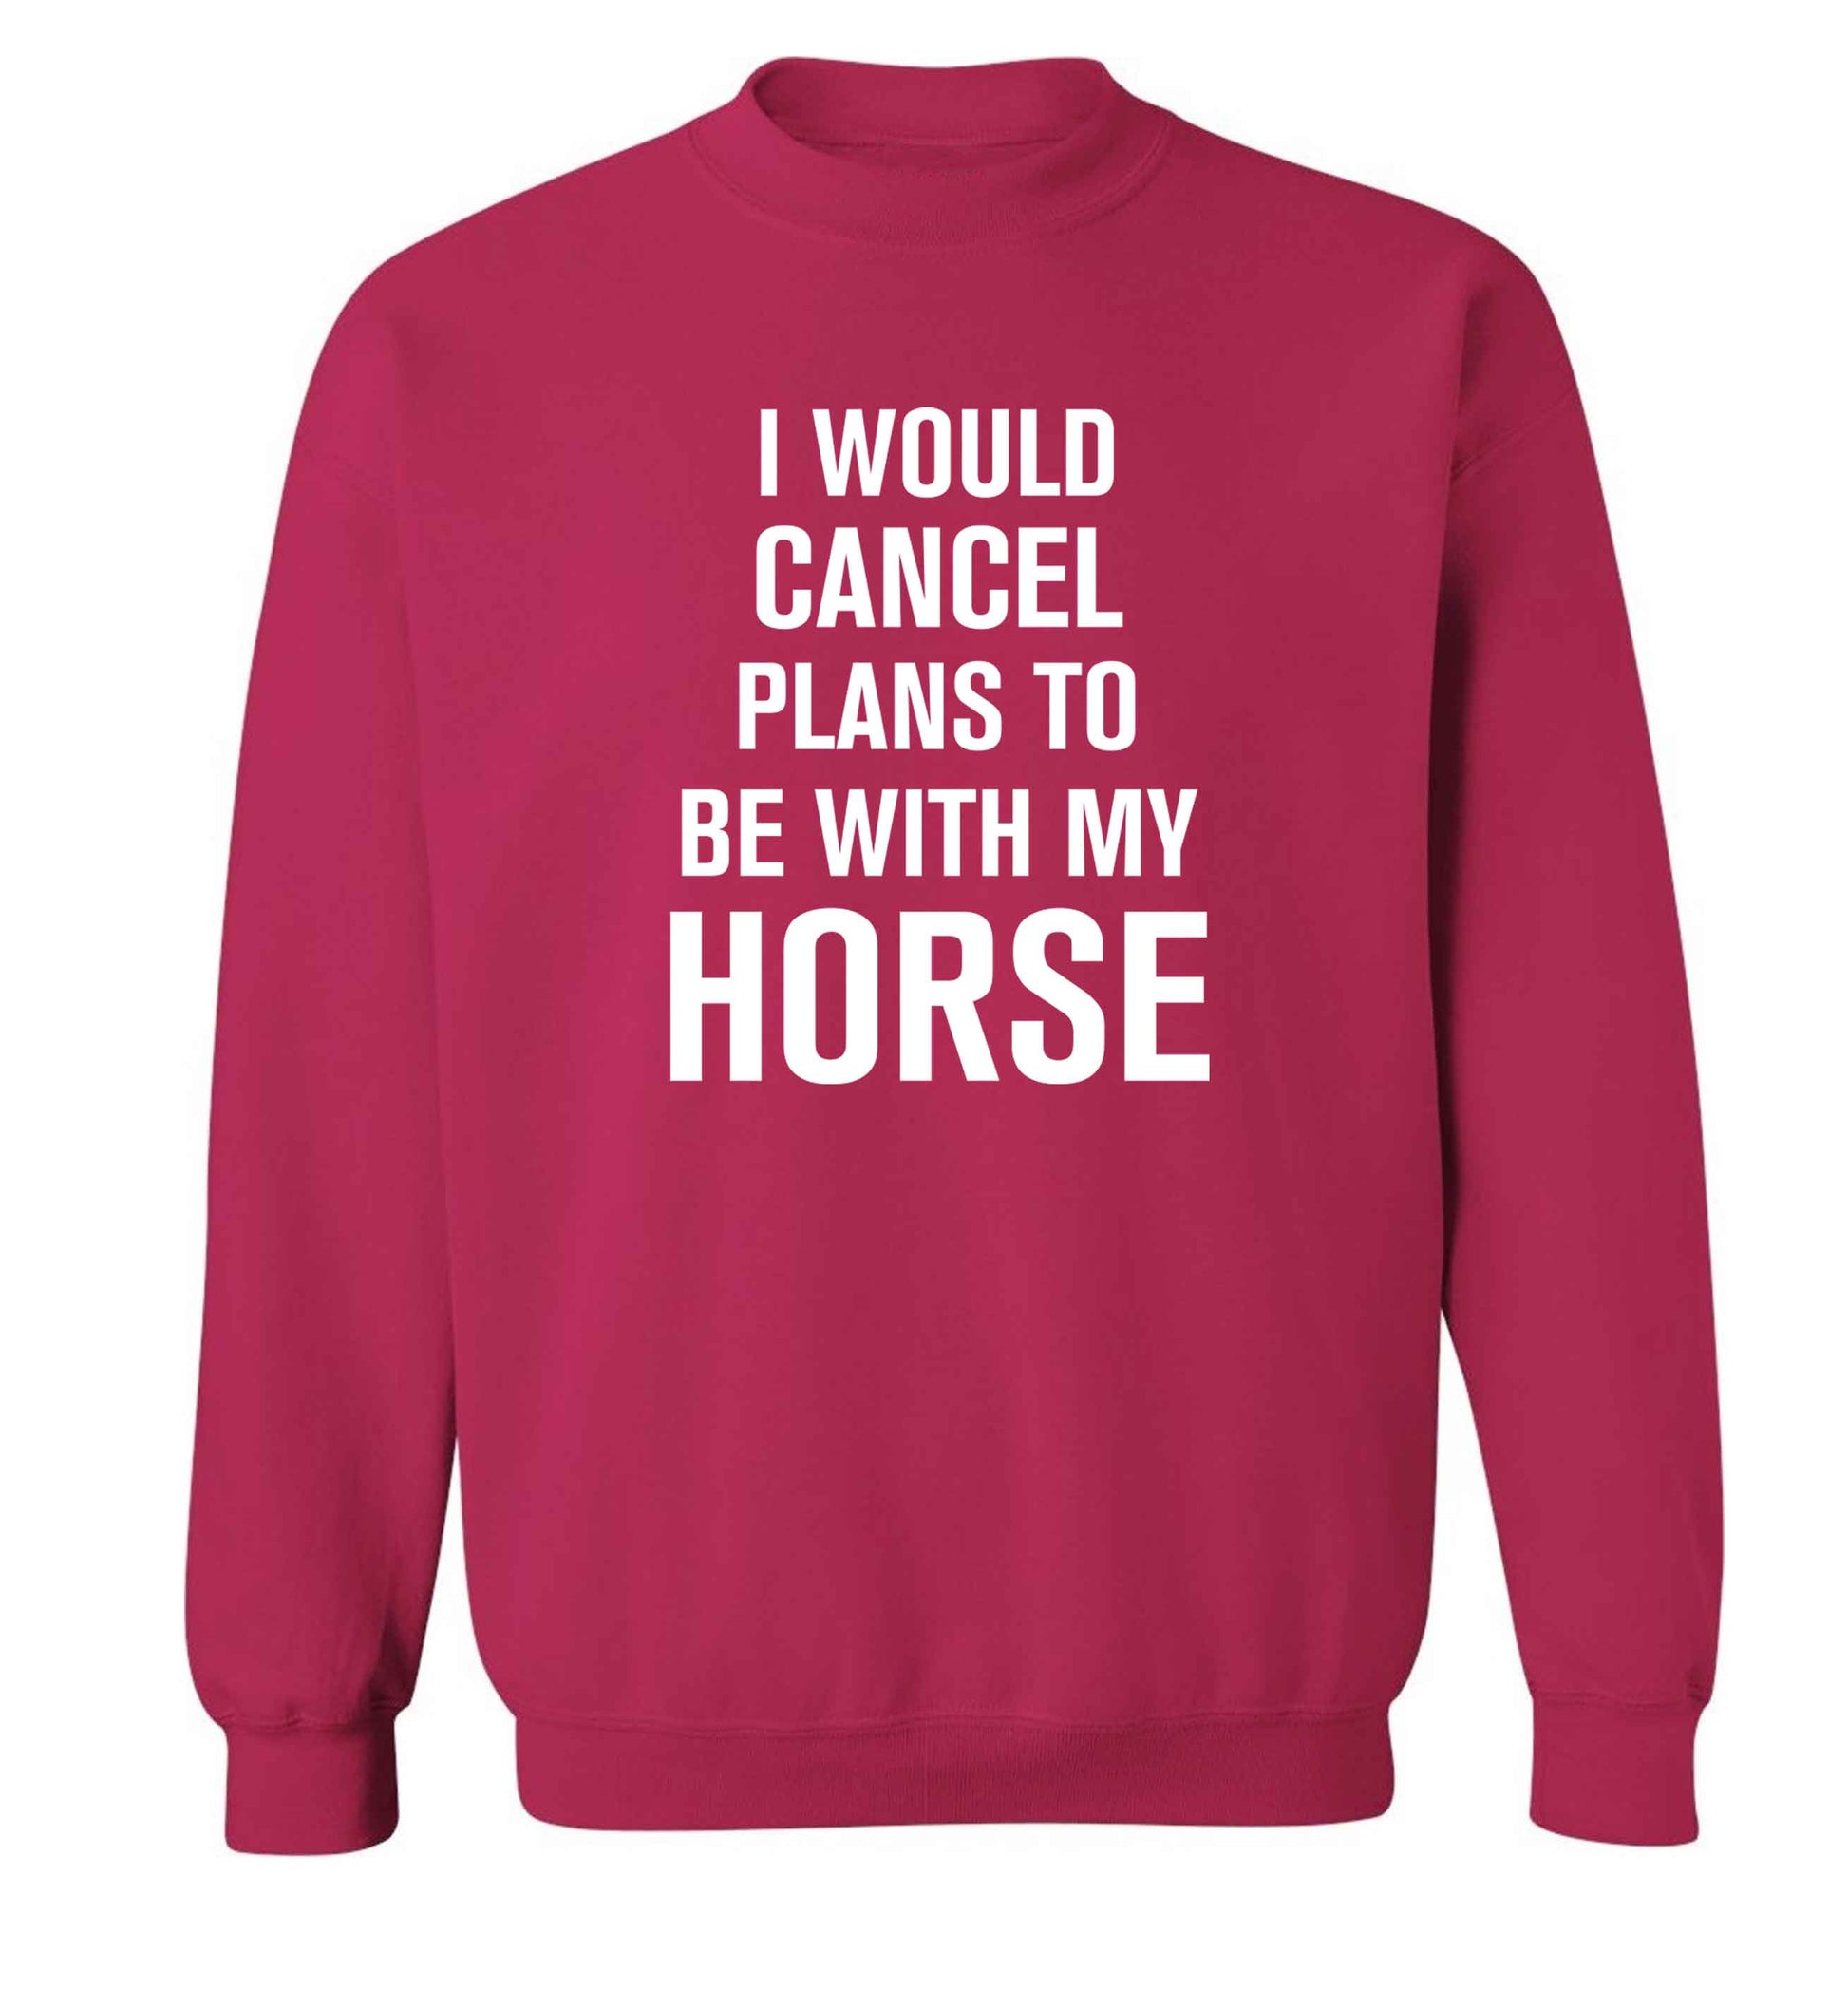 I will cancel plans to be with my horse adult's unisex pink sweater 2XL